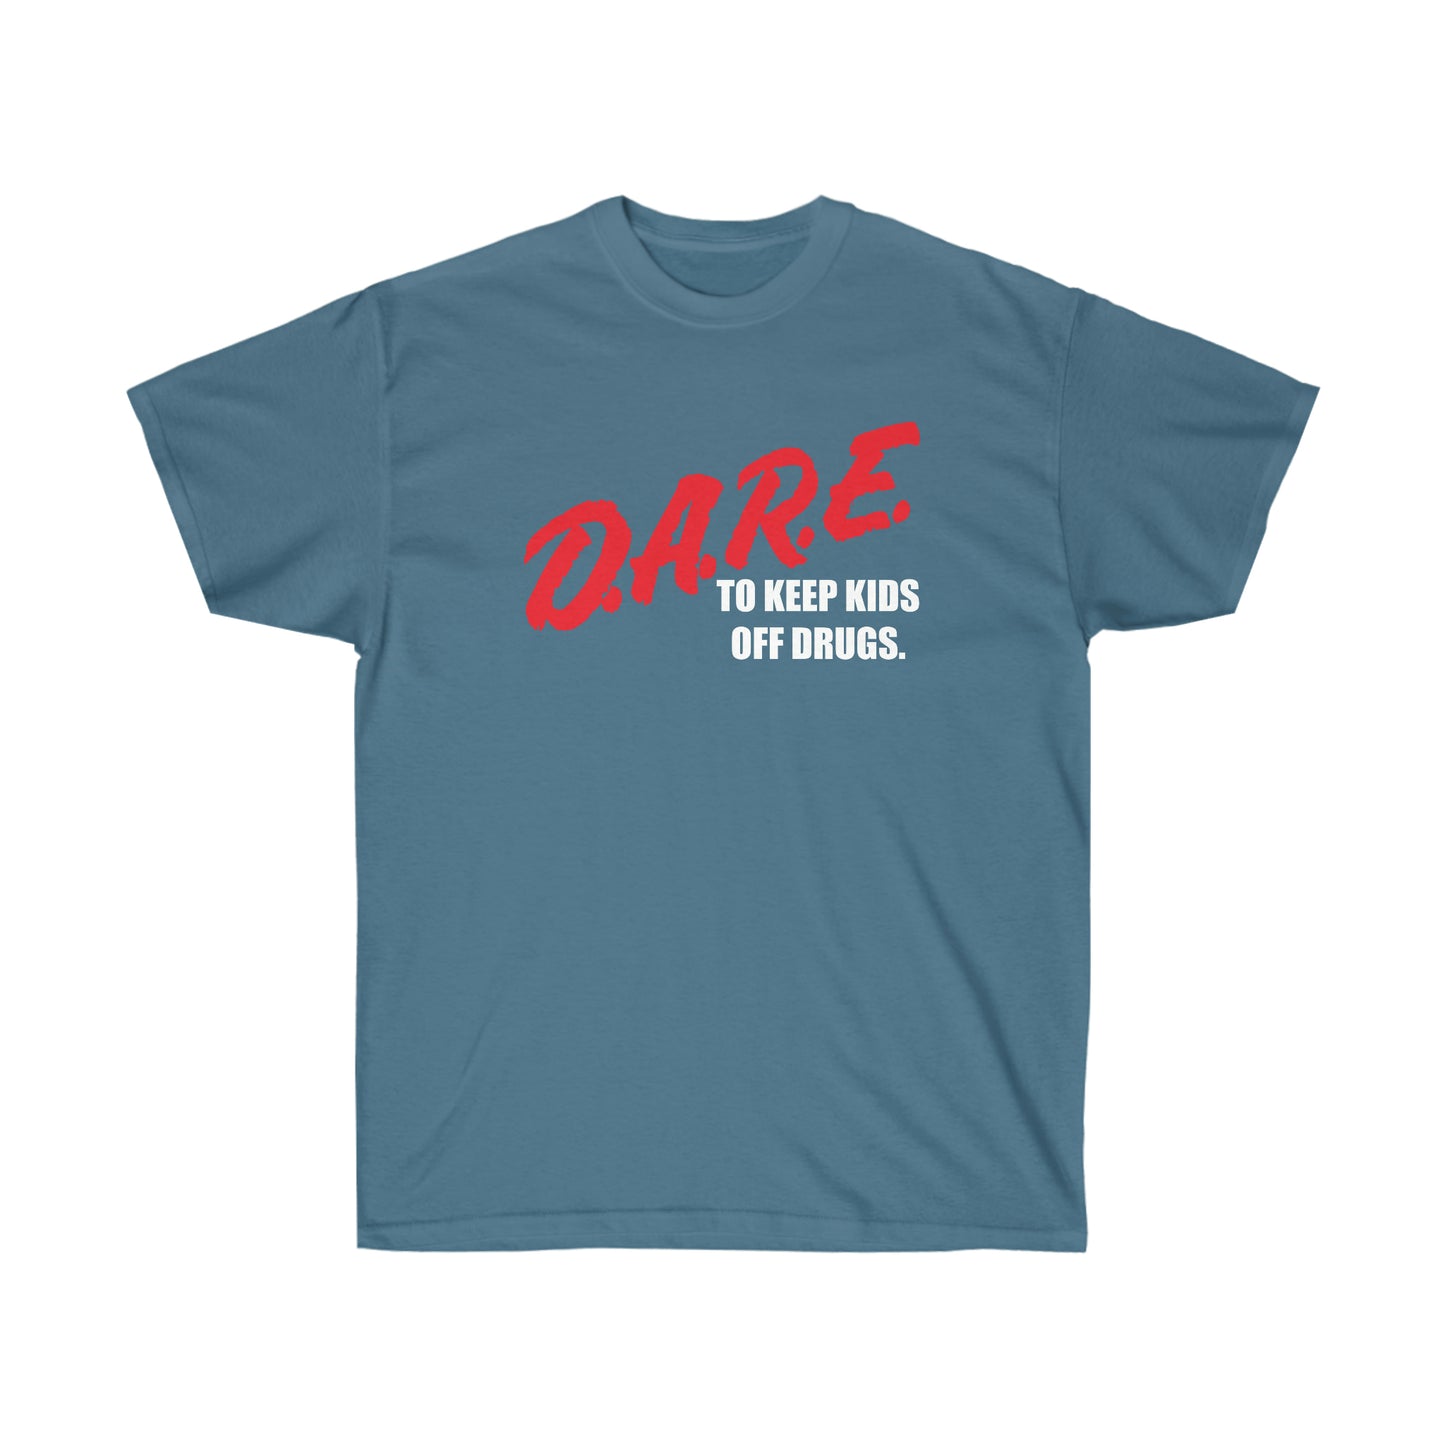 DARE Vintage Shirt With The 80s or 90s clothing retro shirt vibe classic Dare t-shirt